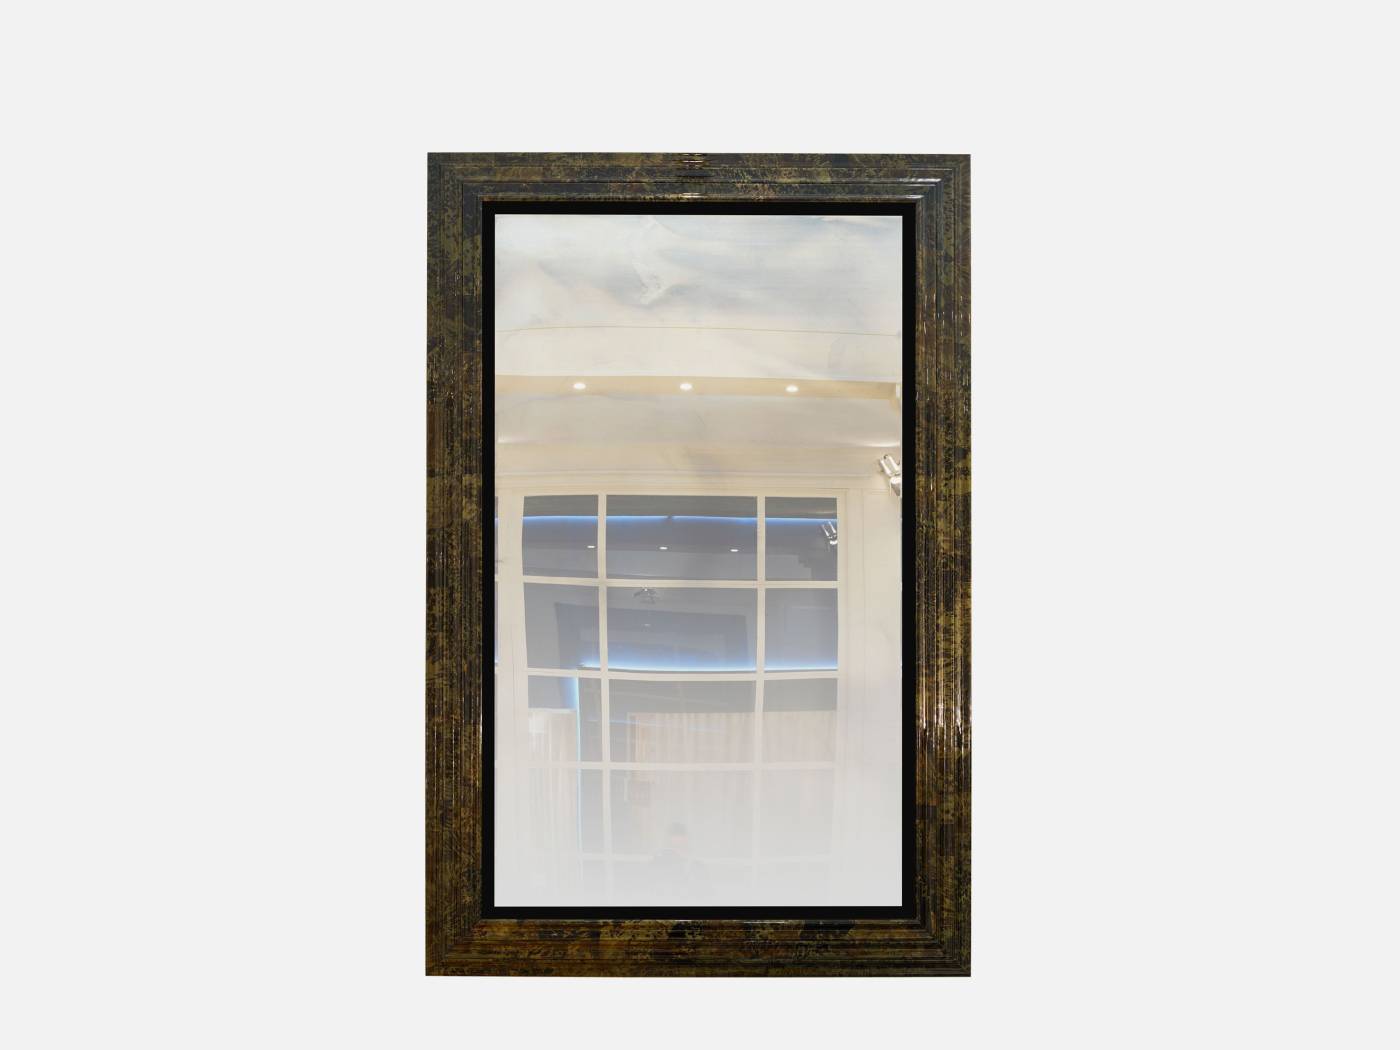 ART. 2209 – C.G. Capelletti Italian Luxury Classic Mirrorboards. Transform your space with sophisticated made in italy classic interior design.